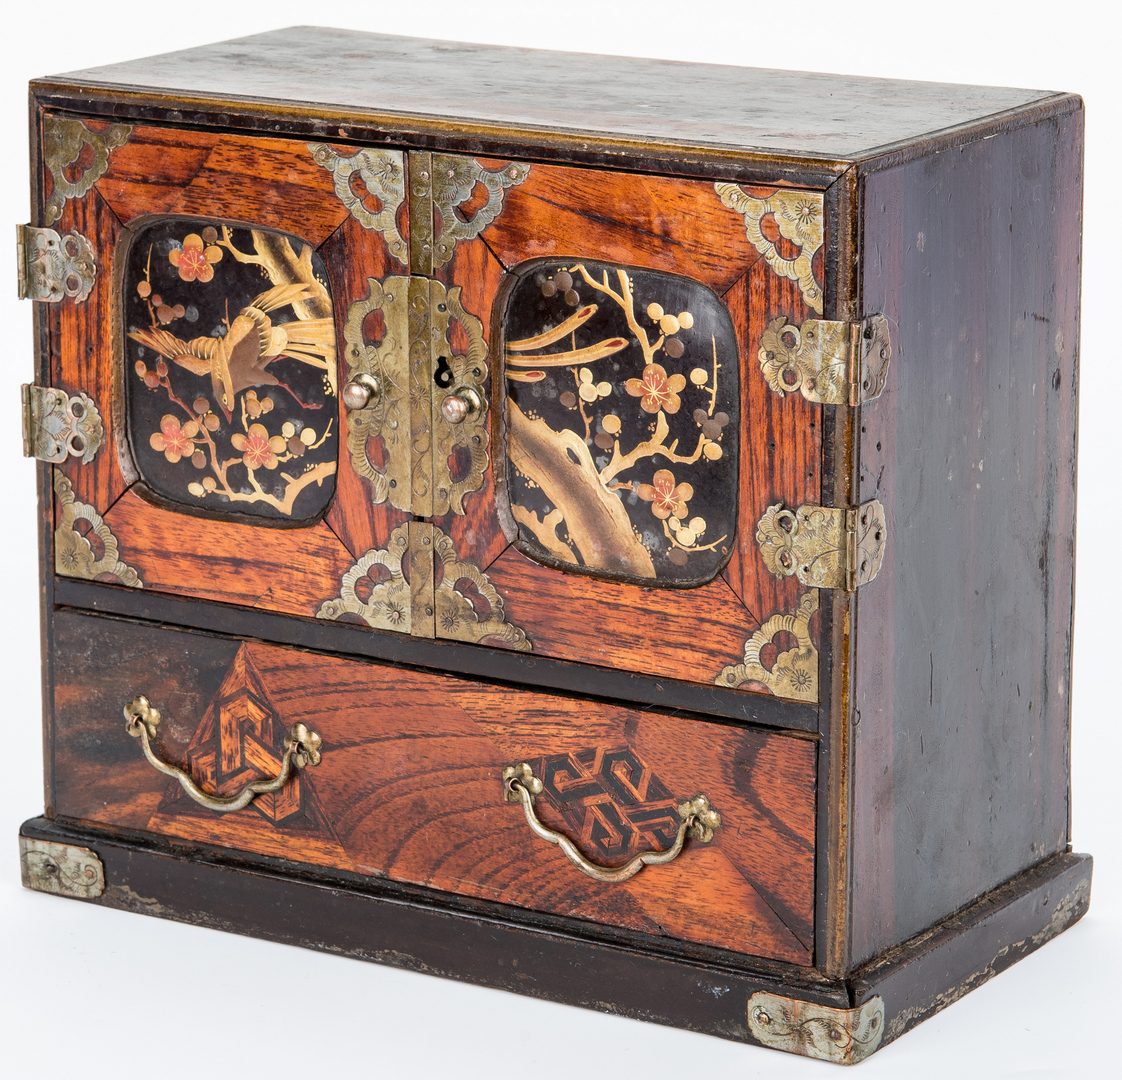 Lot 33: 2 Asian Inlaid Jewelry or Keepsake Chests